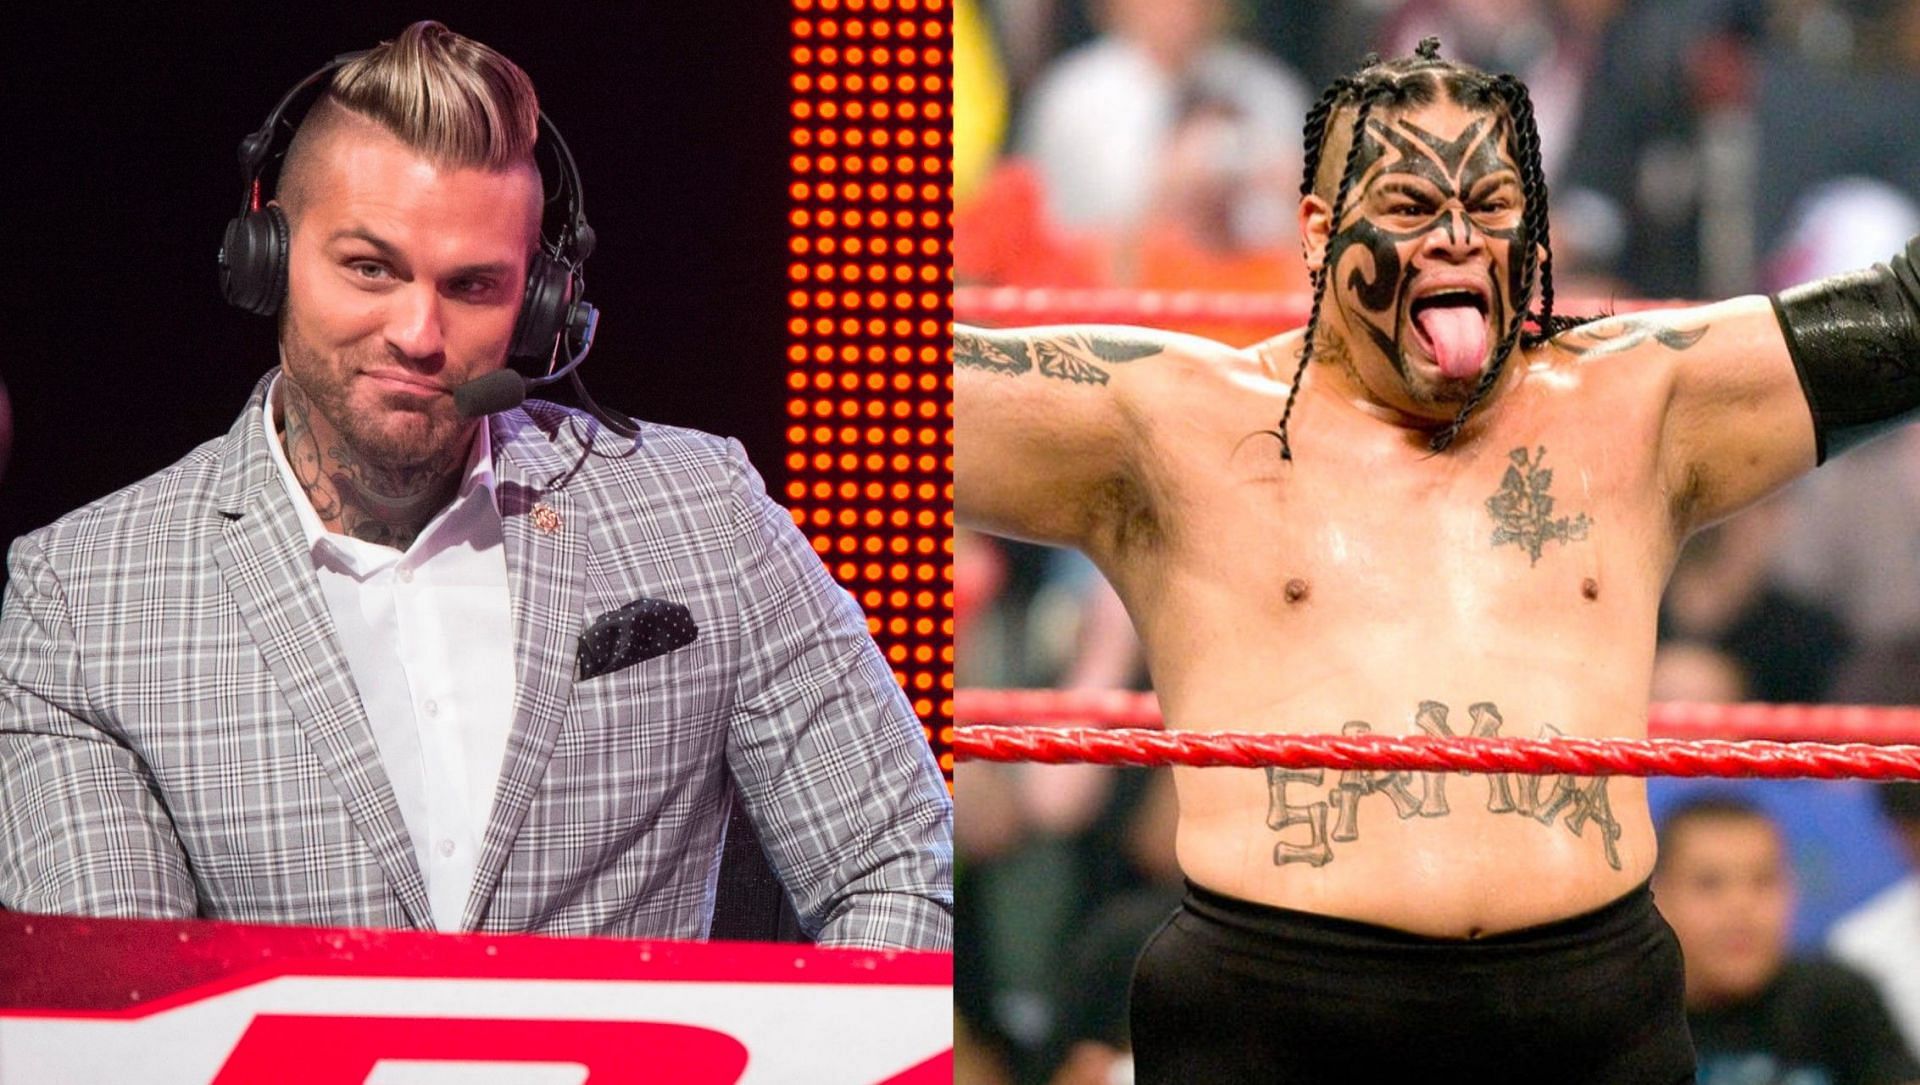 Corey Graves is the announcer on WWE RAW